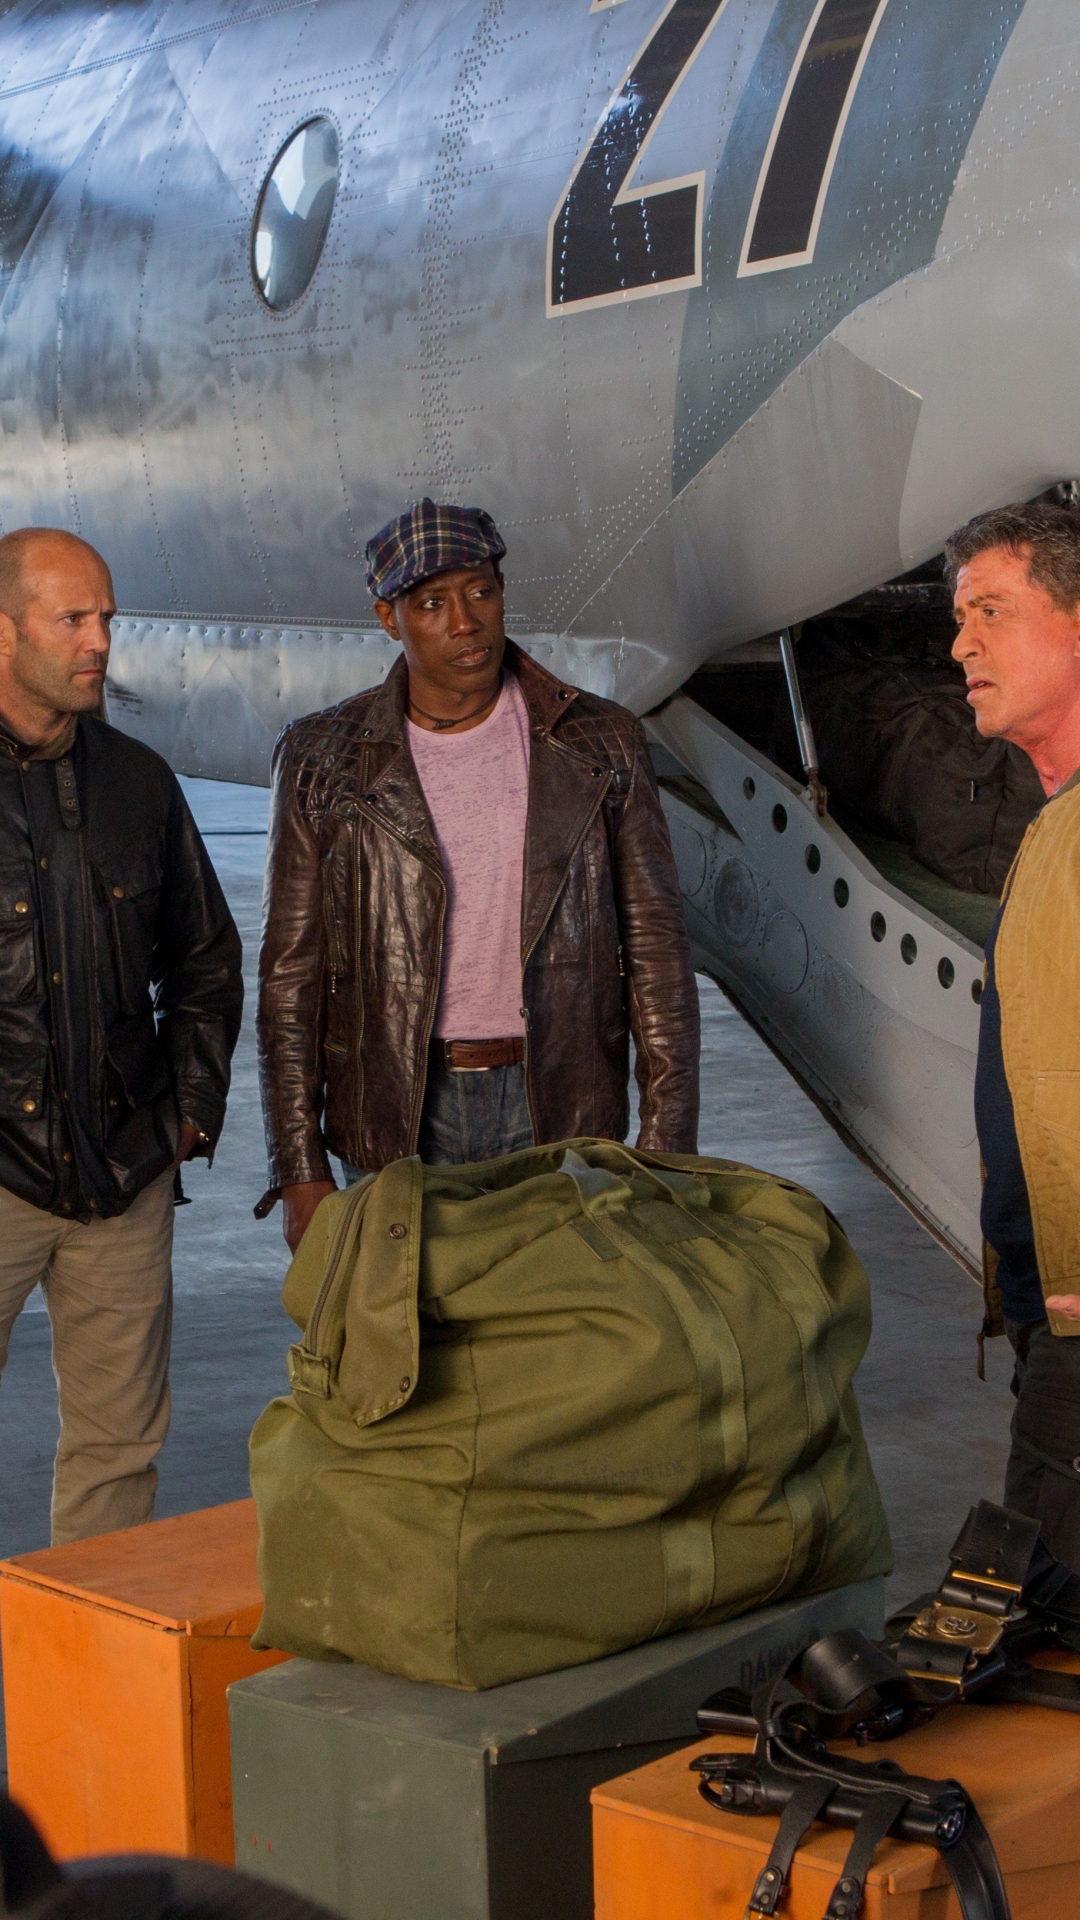 movie, the expendables 3, randy couture, sylvester stallone, dolph lundgren, wesley snipes, jason statham, barney ross, doc (the expendables), lee christmas, gunnar jensen, toll road, the expendables